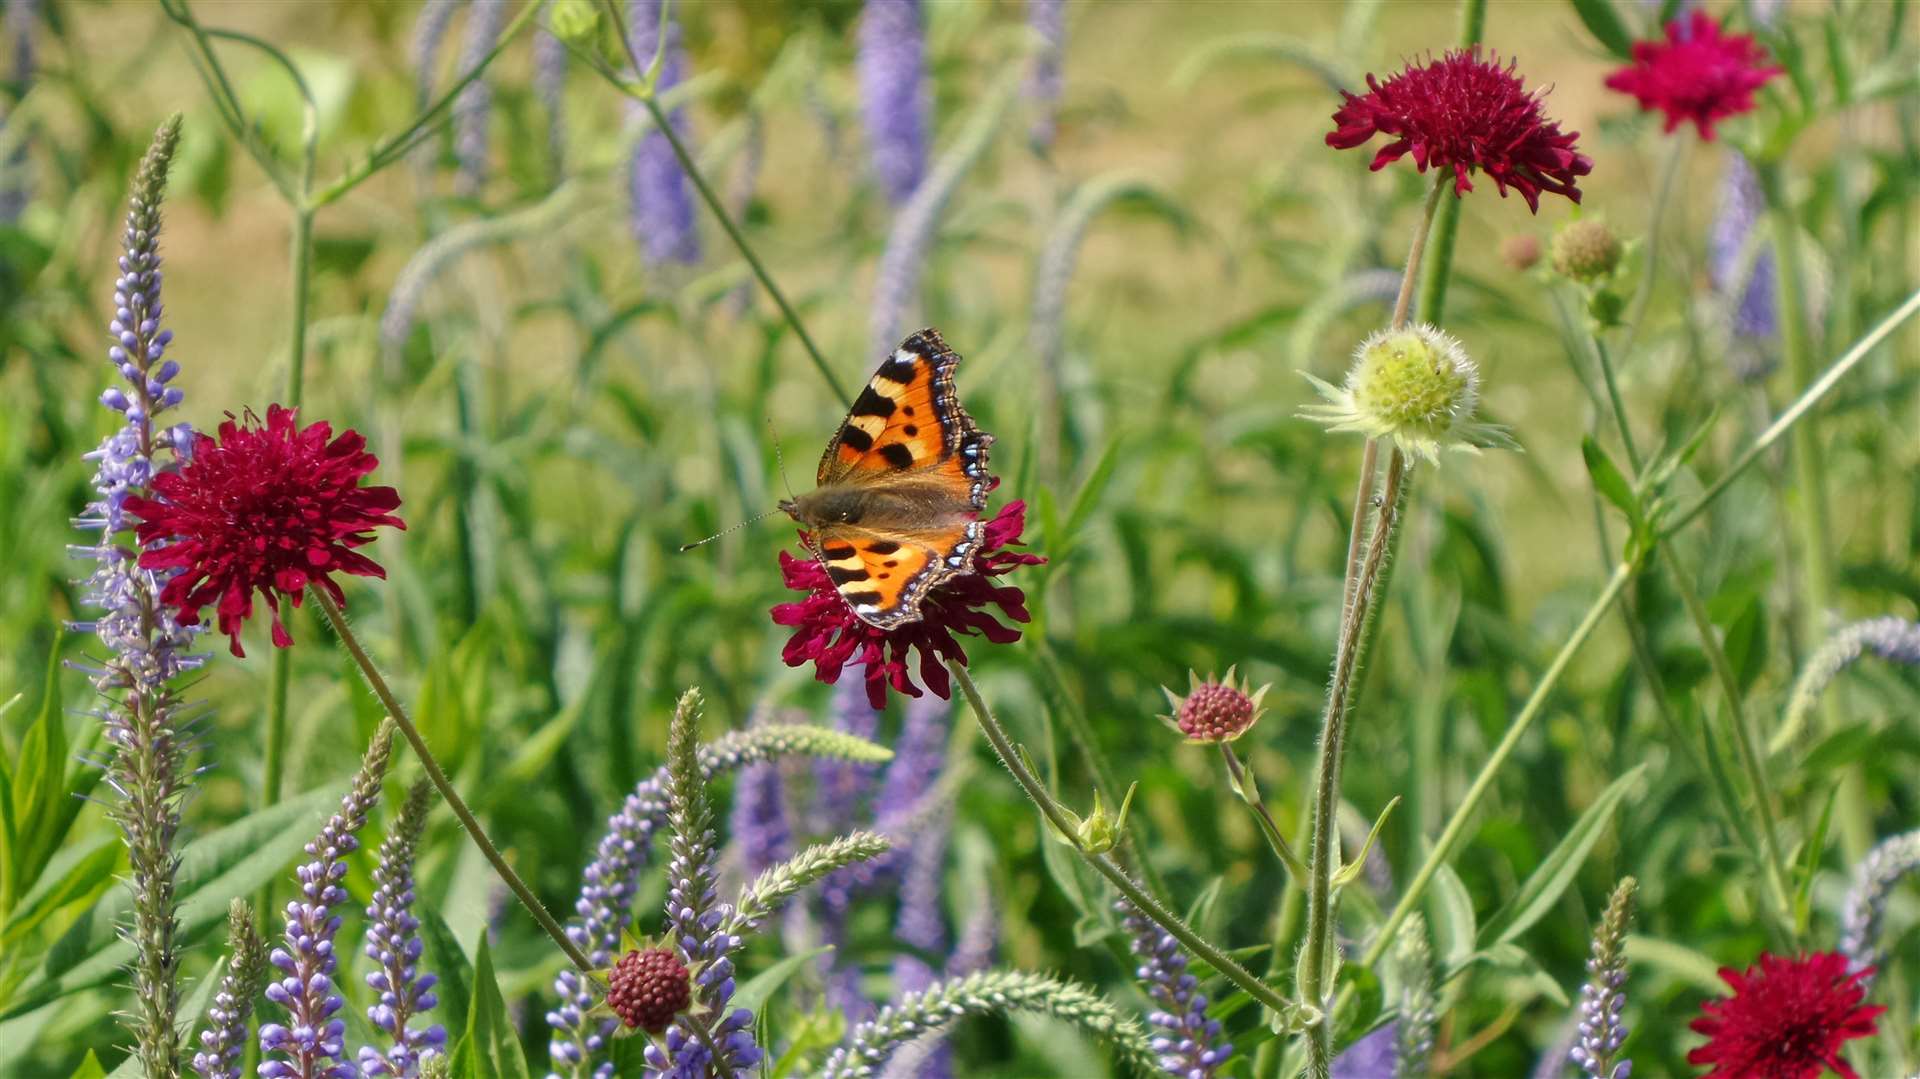 Look out for butterflies, such as this small tortoiseshell butterfly